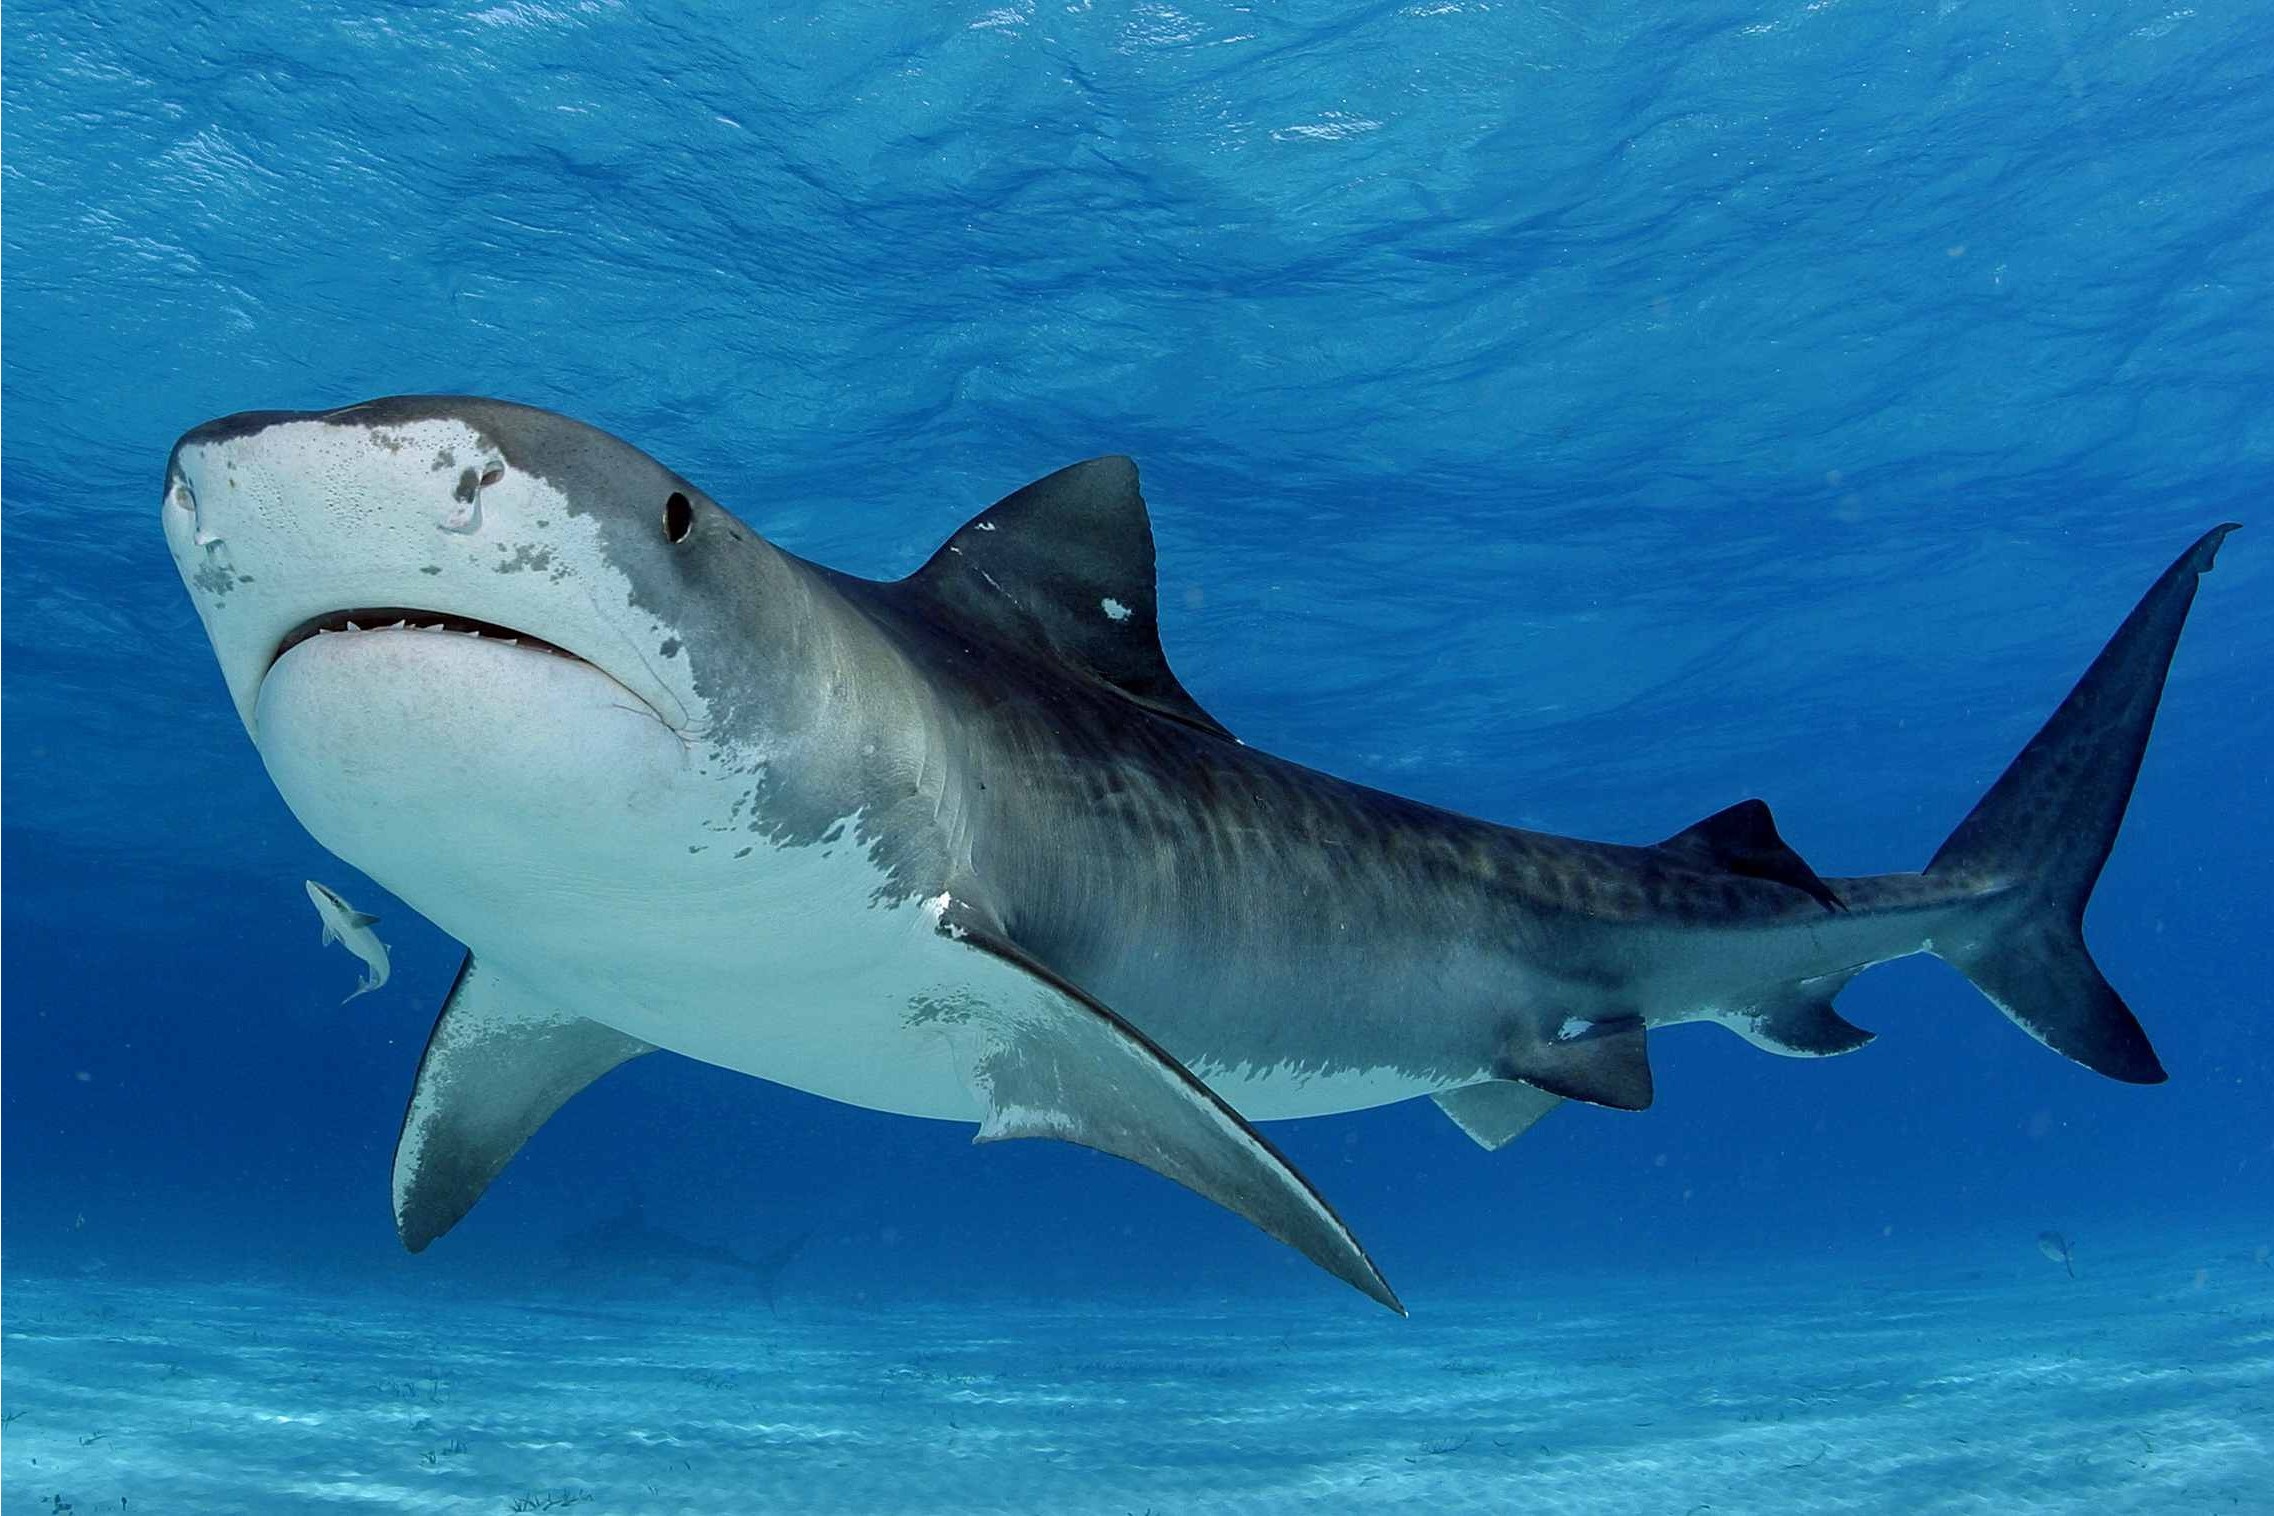 A Tiger Shark is suspected in today's shark attack